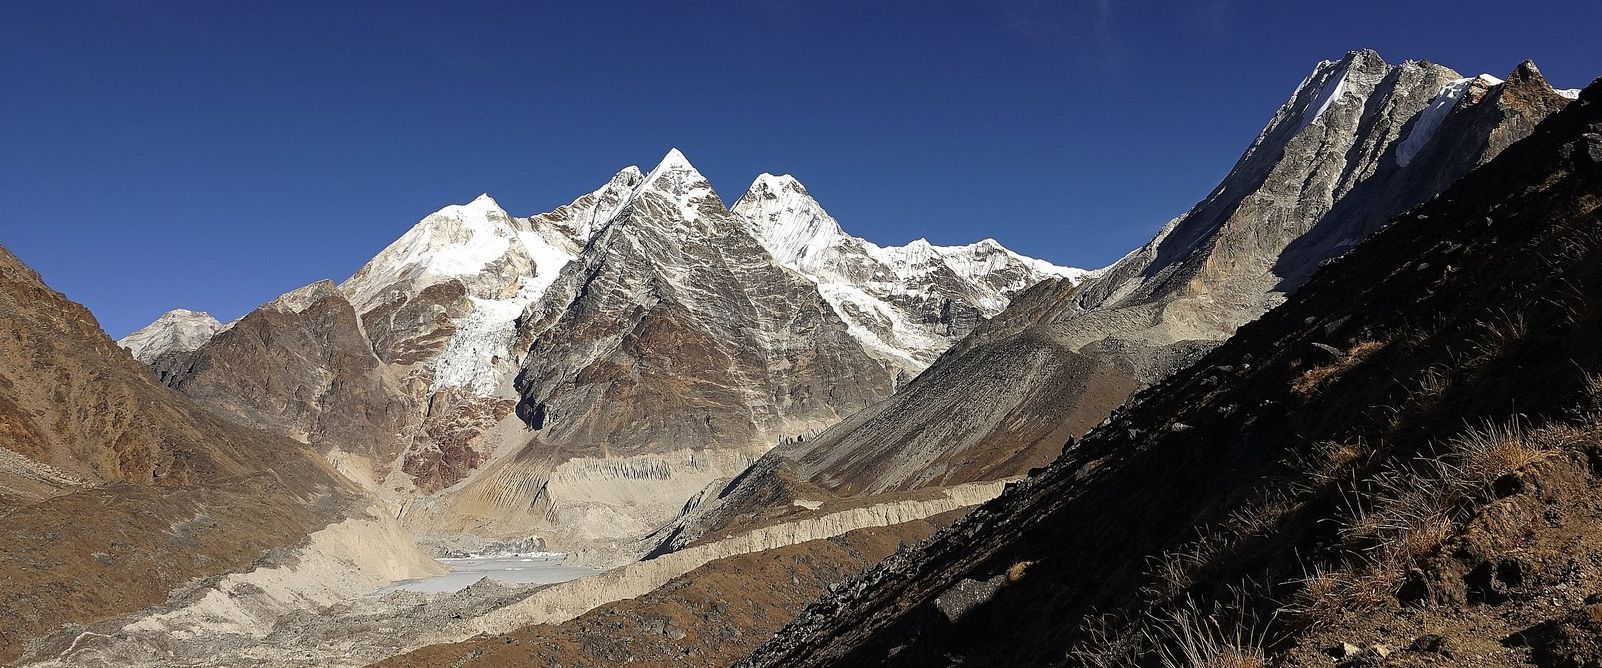 Malangphulang Group of 6000m Peaks from Dig Kare on ascent from Hinku Valley to Mera La